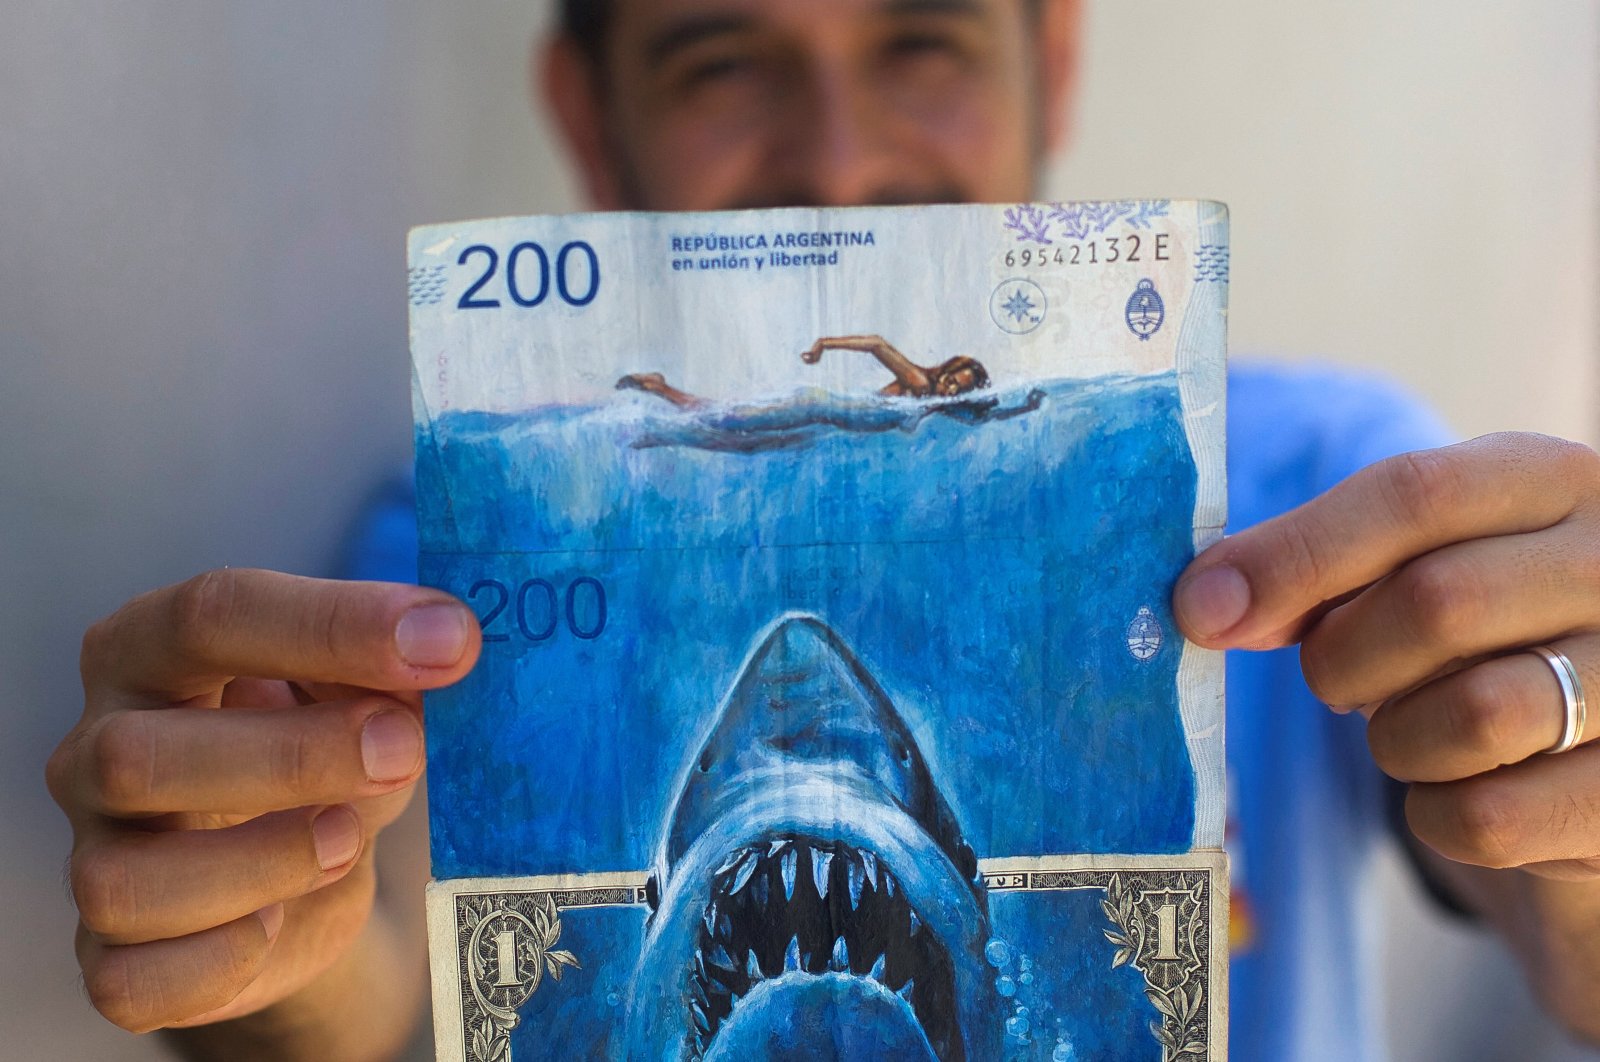 Artist Sergio Diaz holds intervened Argentine pesos bills and a U.S. dollar bill depicting Steven Spielberg&#039;s movie &quot;Shark&quot; as a parody of Argentina&#039;s ever-increasing inflation, in Salta, Argentina, Dec. 30, 2022. (Reuters Photo)